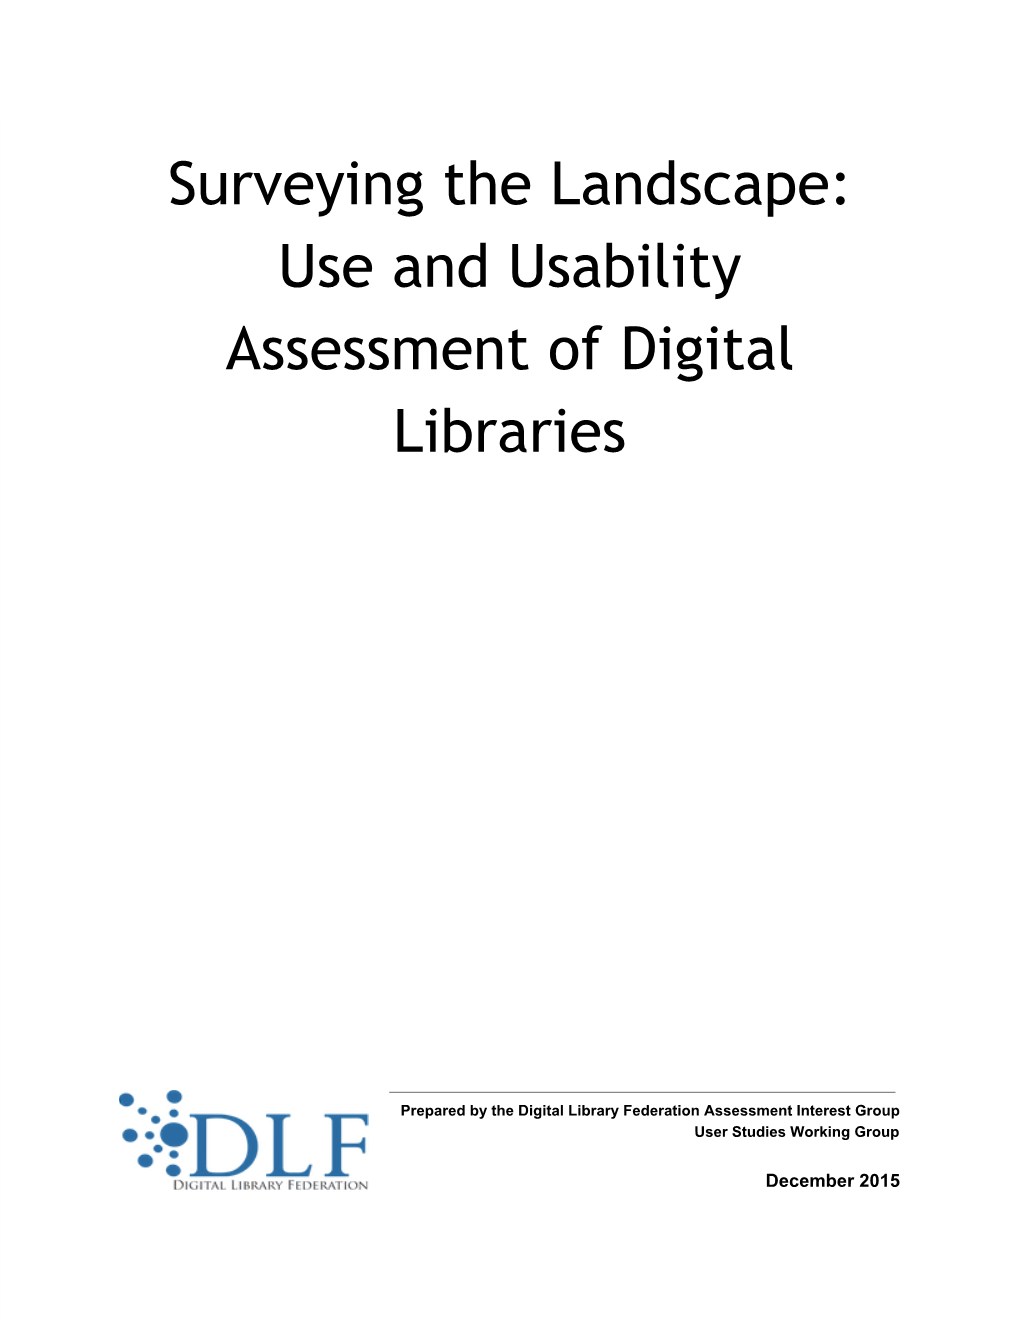 Surveying the Landscape: Use and Usability Assessment of Digital Libraries